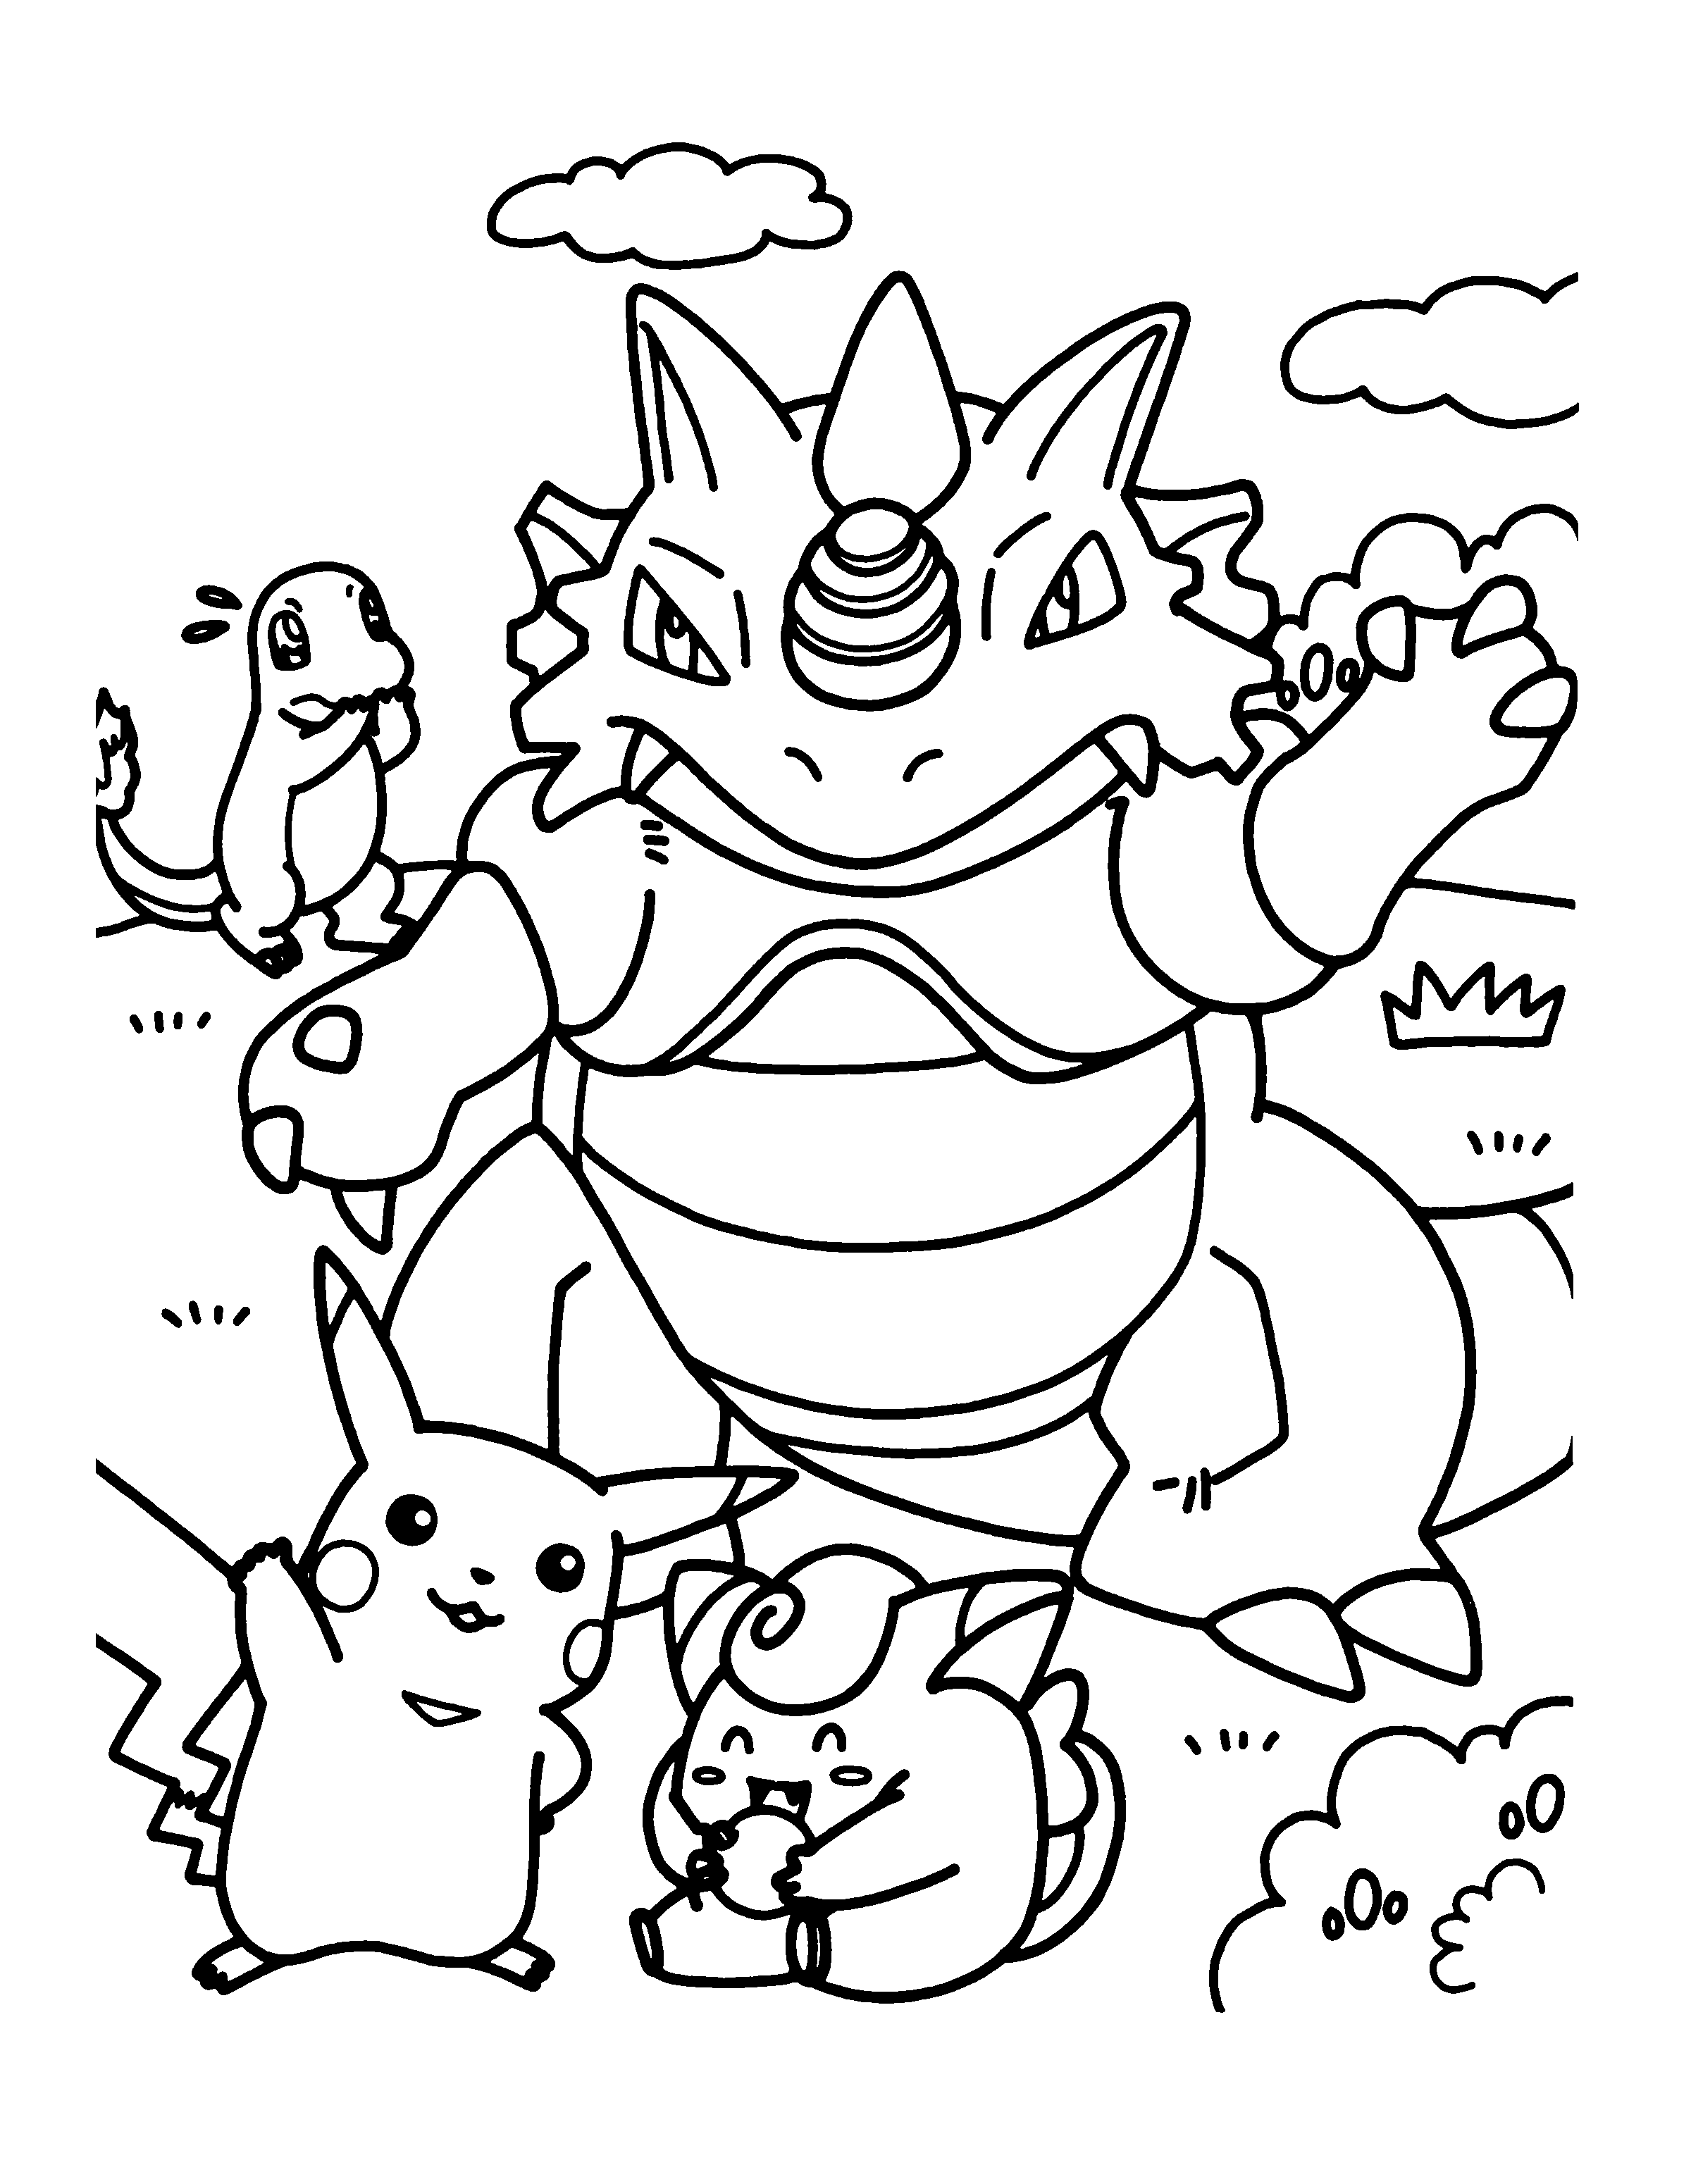 animated-coloring-pages-pokemon-image-0654